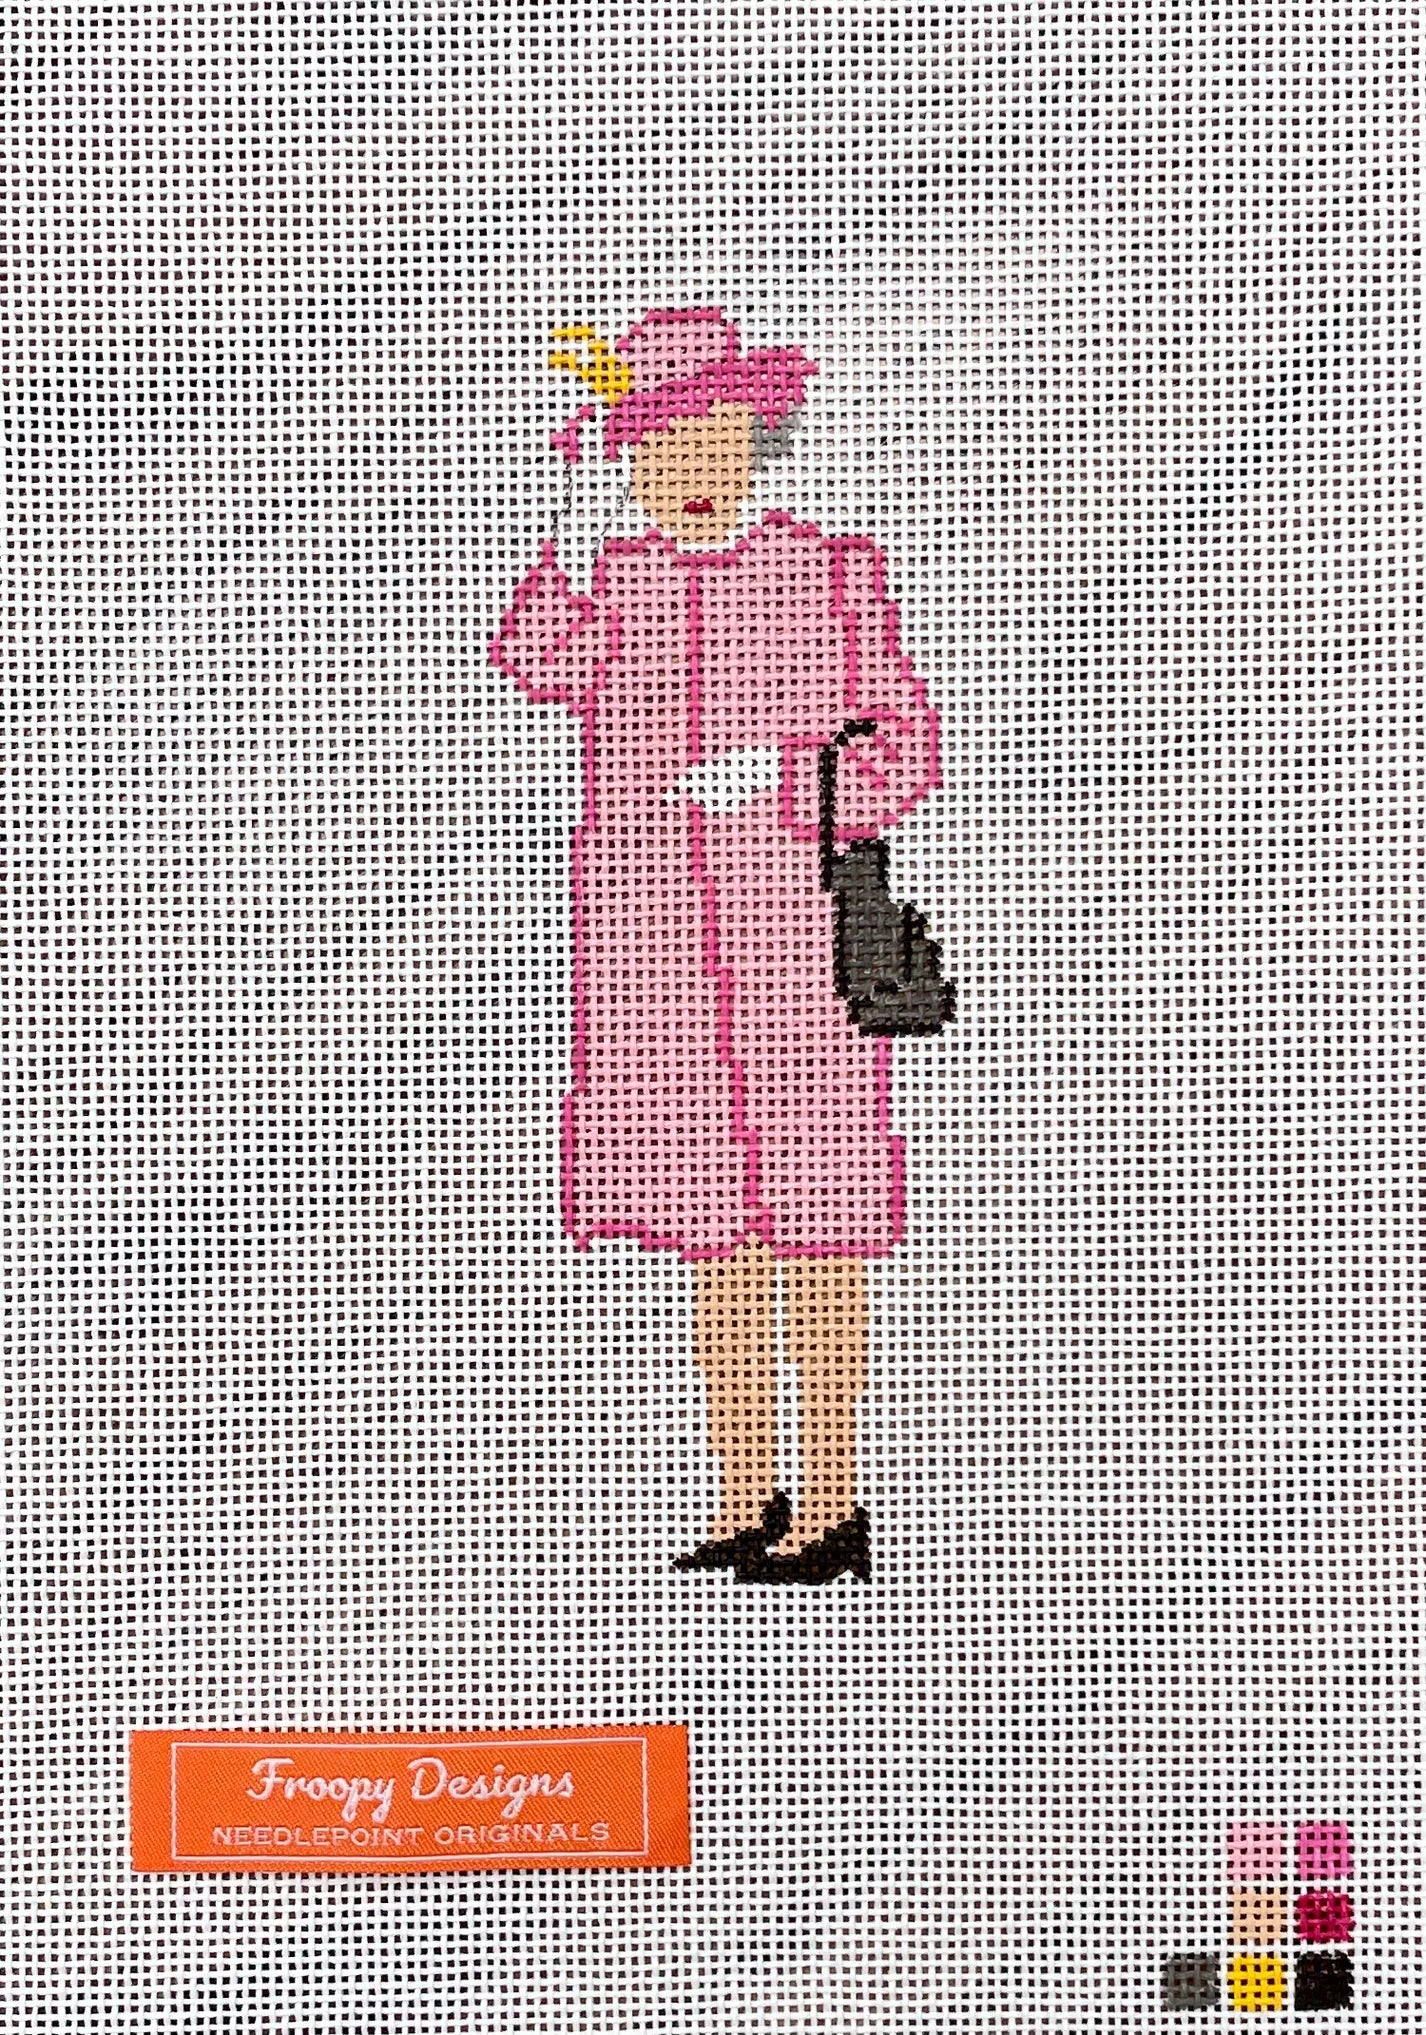 The Collection Froopy Designs FD12 HM Elizabeth Waves in Pink